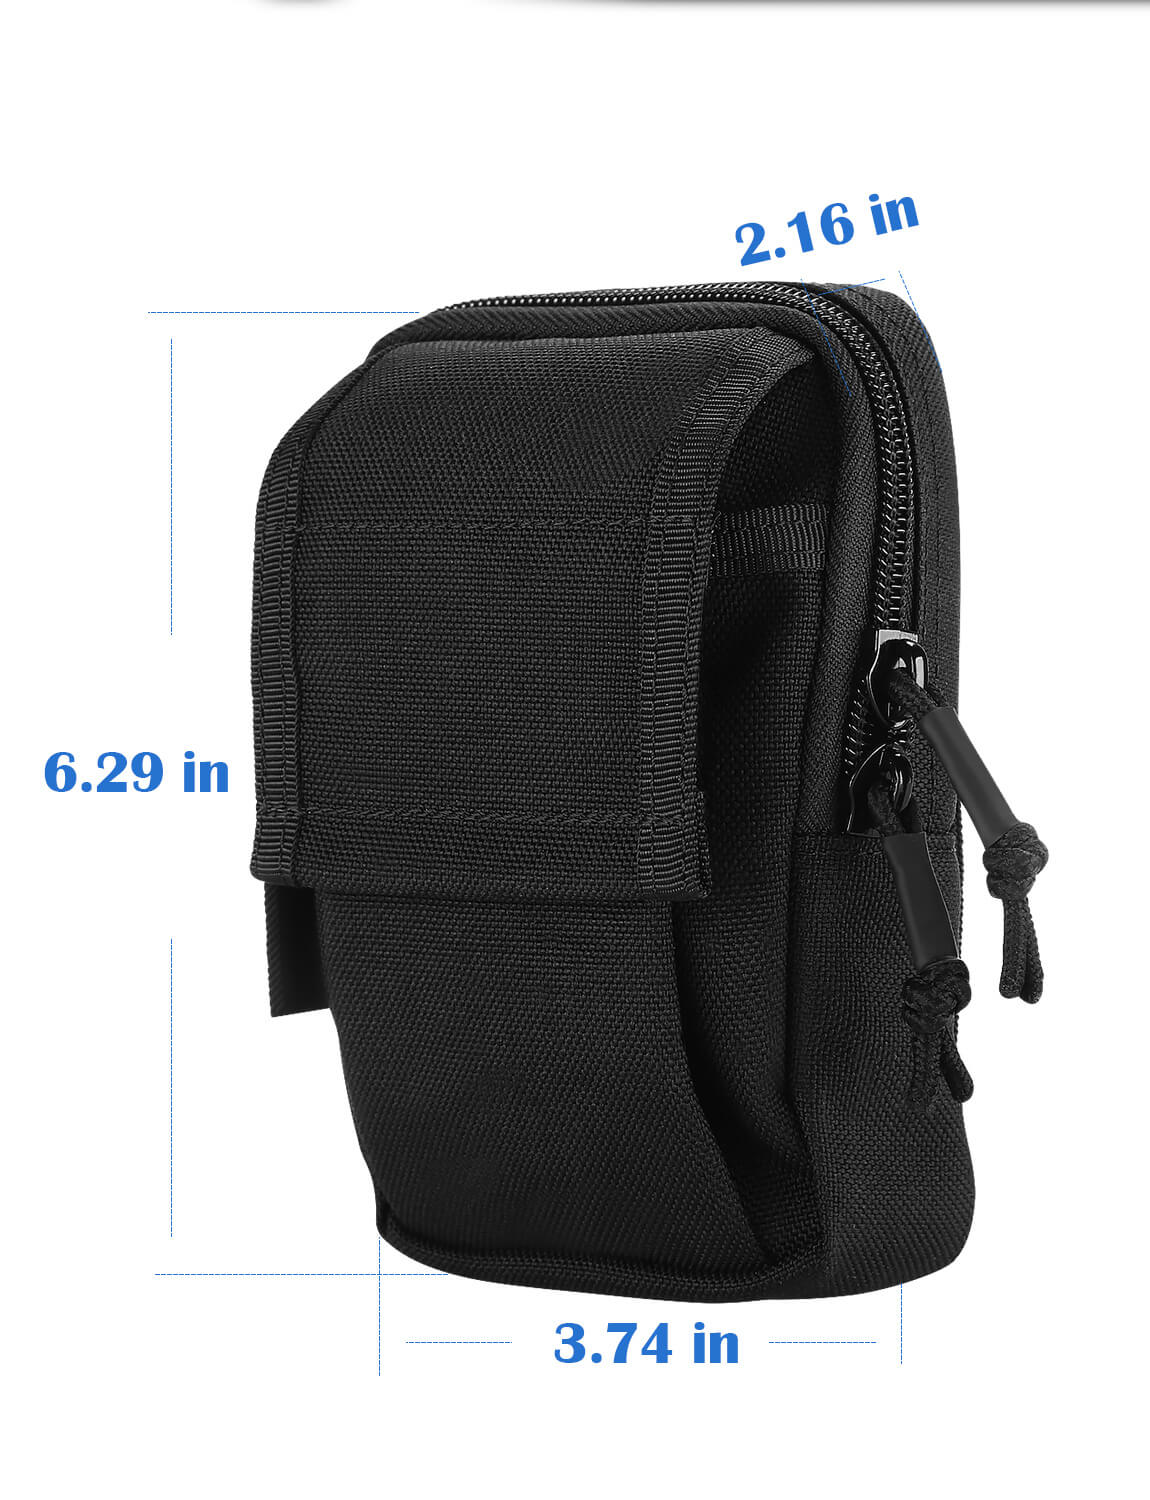 BOBLOV Body Camera Case Protection Pouch for All Brands of Body Cameras in Black8